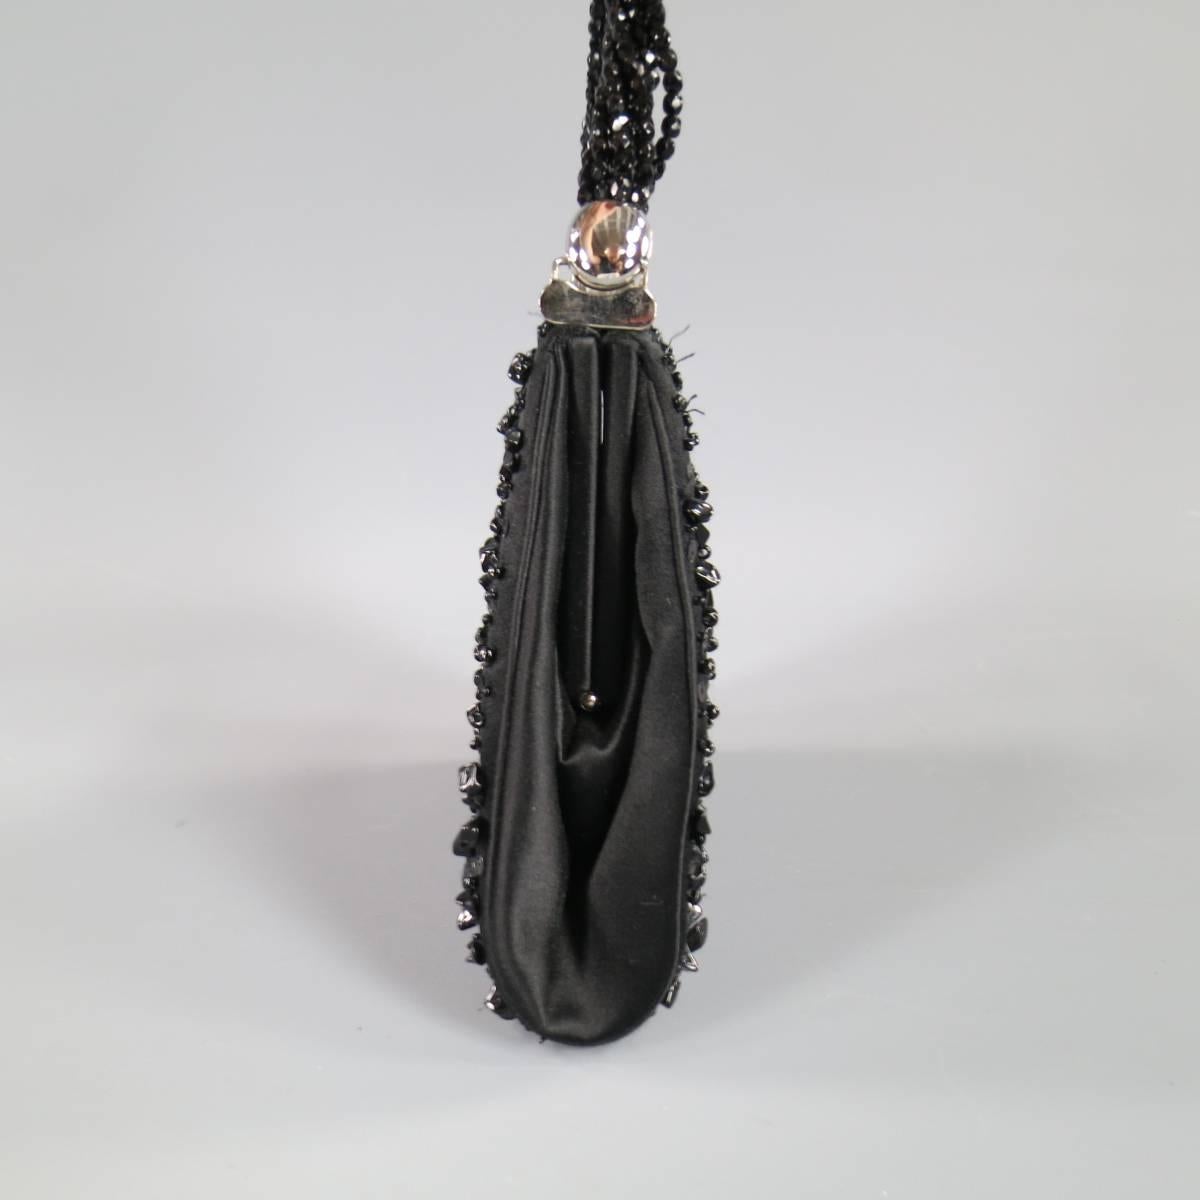 This vintage JUDITH LEIBER evening bag comes in black satin covered in various pebble, sequin, and circle beads, with a silver tone black crystal studded closure, and beaded strand handle. This piece comes in 